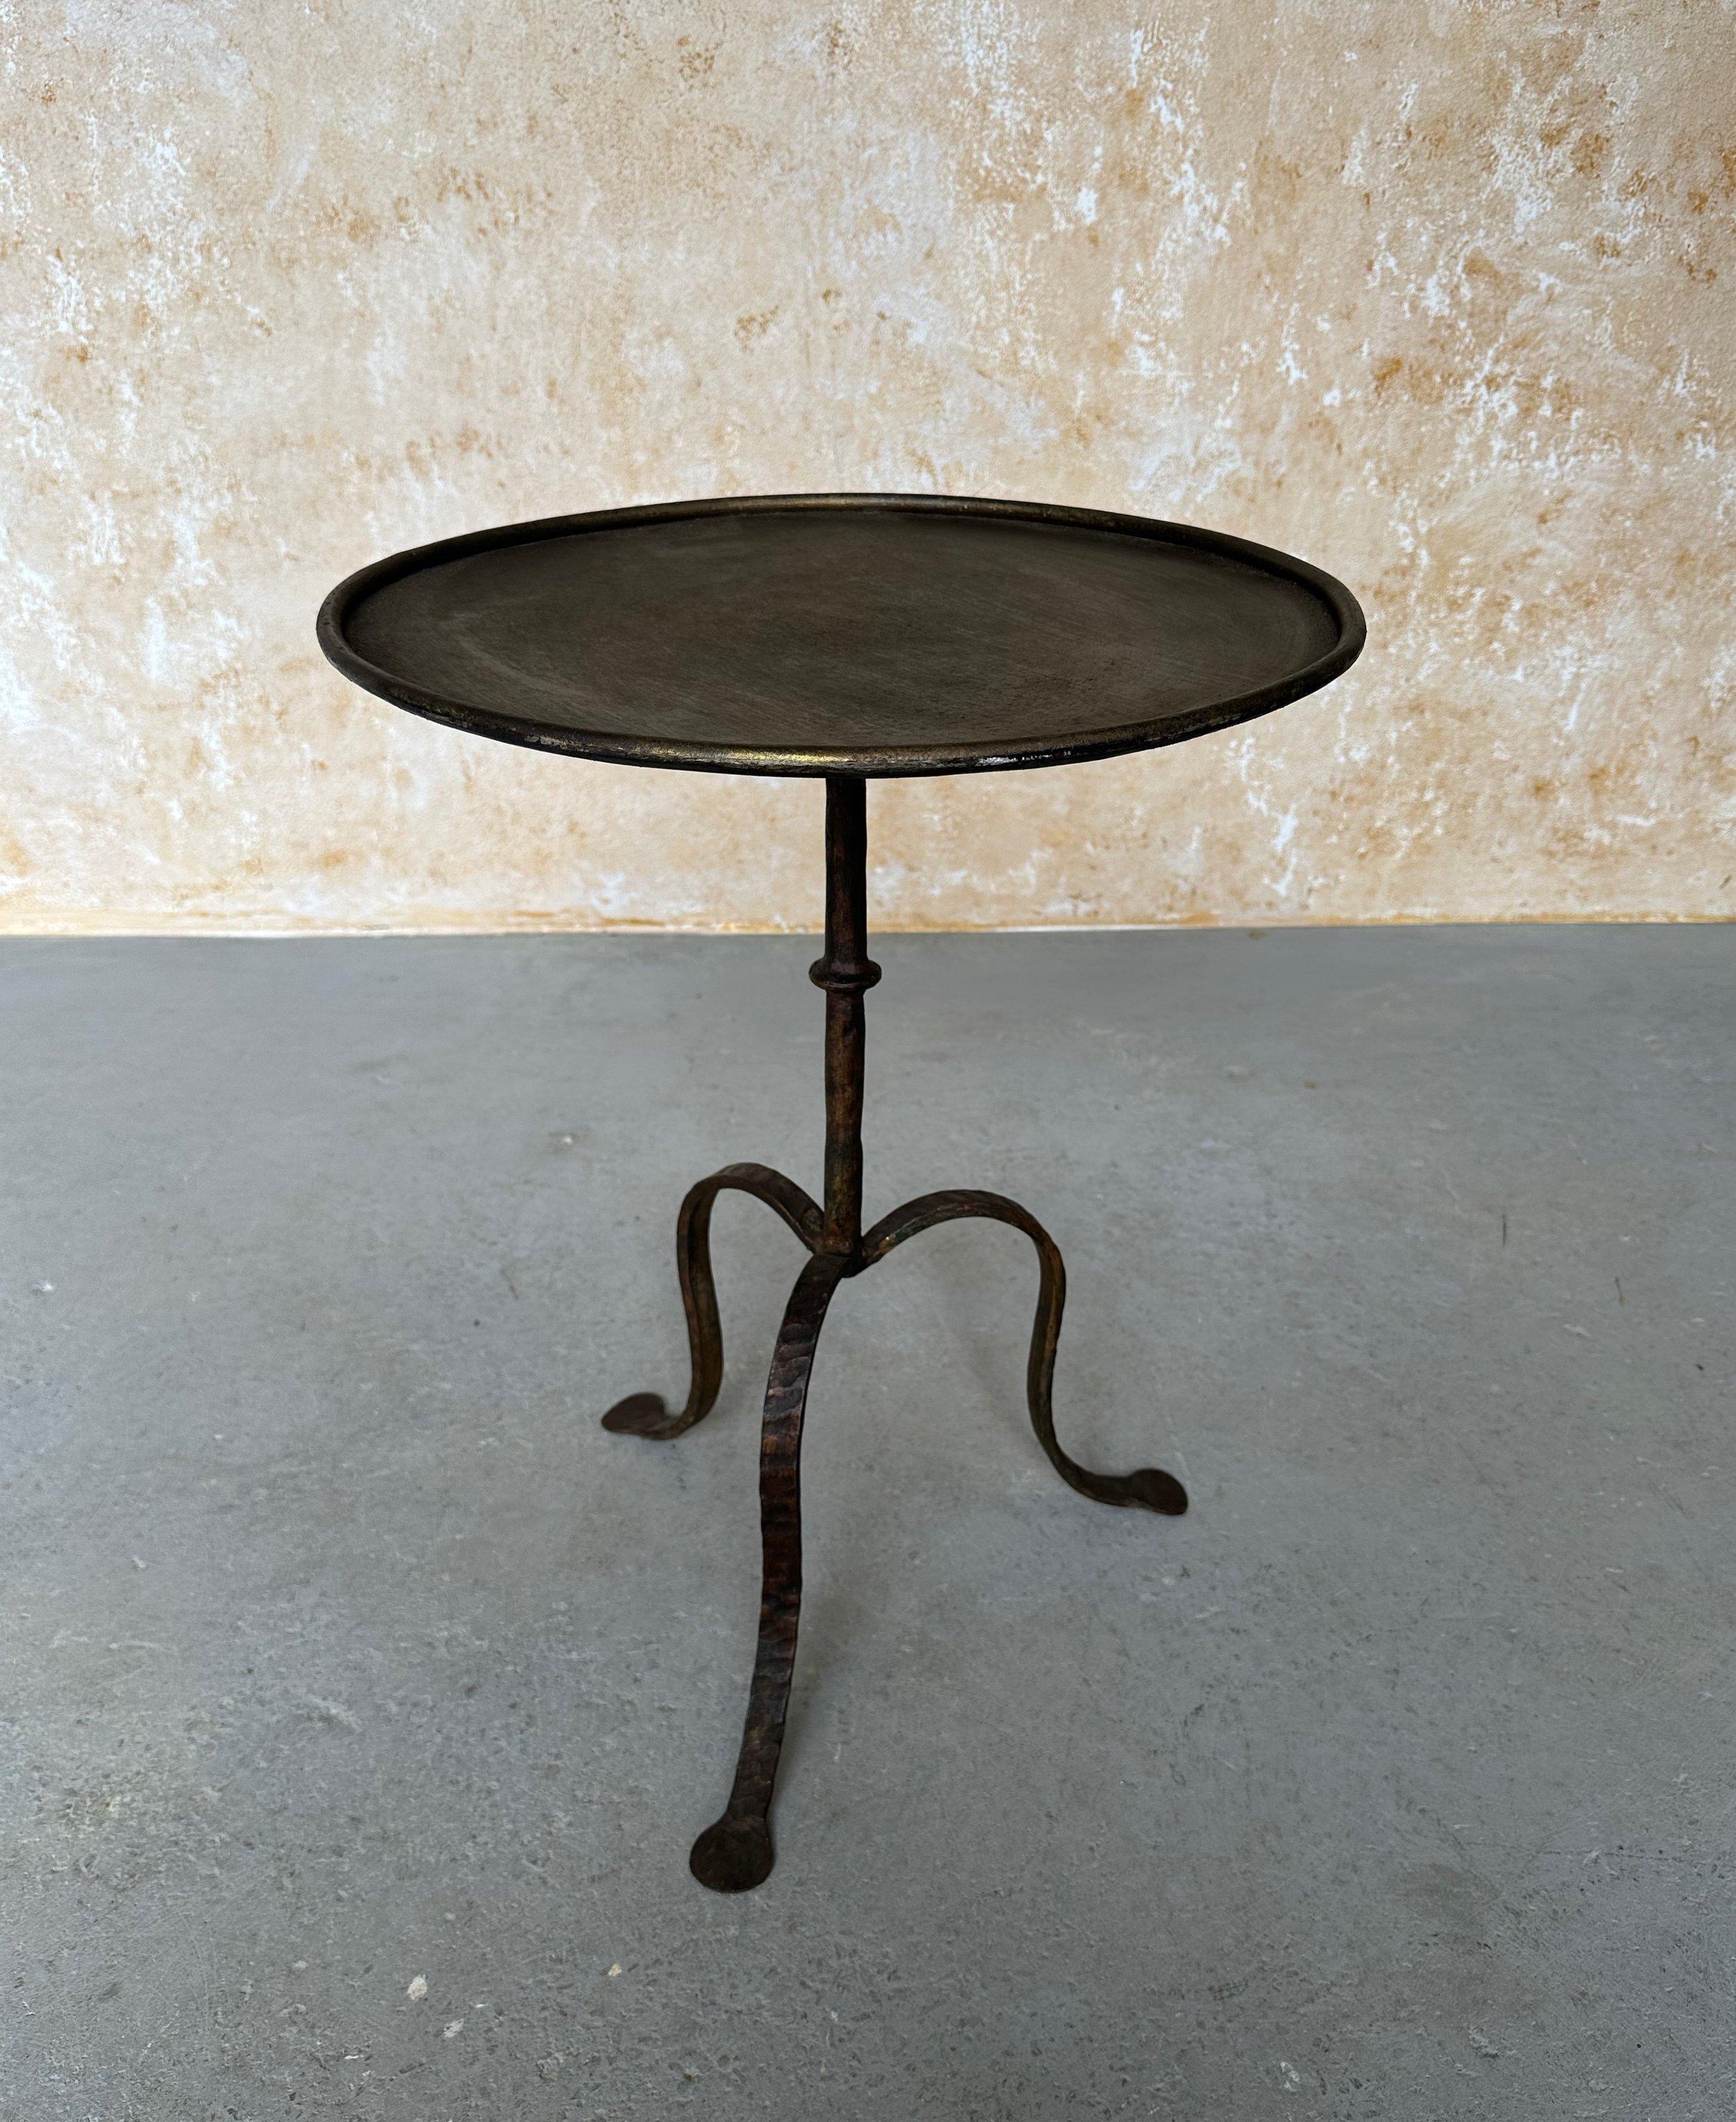 This large rustic Spanish iron side table from the 1950s features a circular stem with a central ring detail supported by a tripod base with gracefully curved hammered legs. The round top, surrounded by a rolled frame, is designed to securely hold